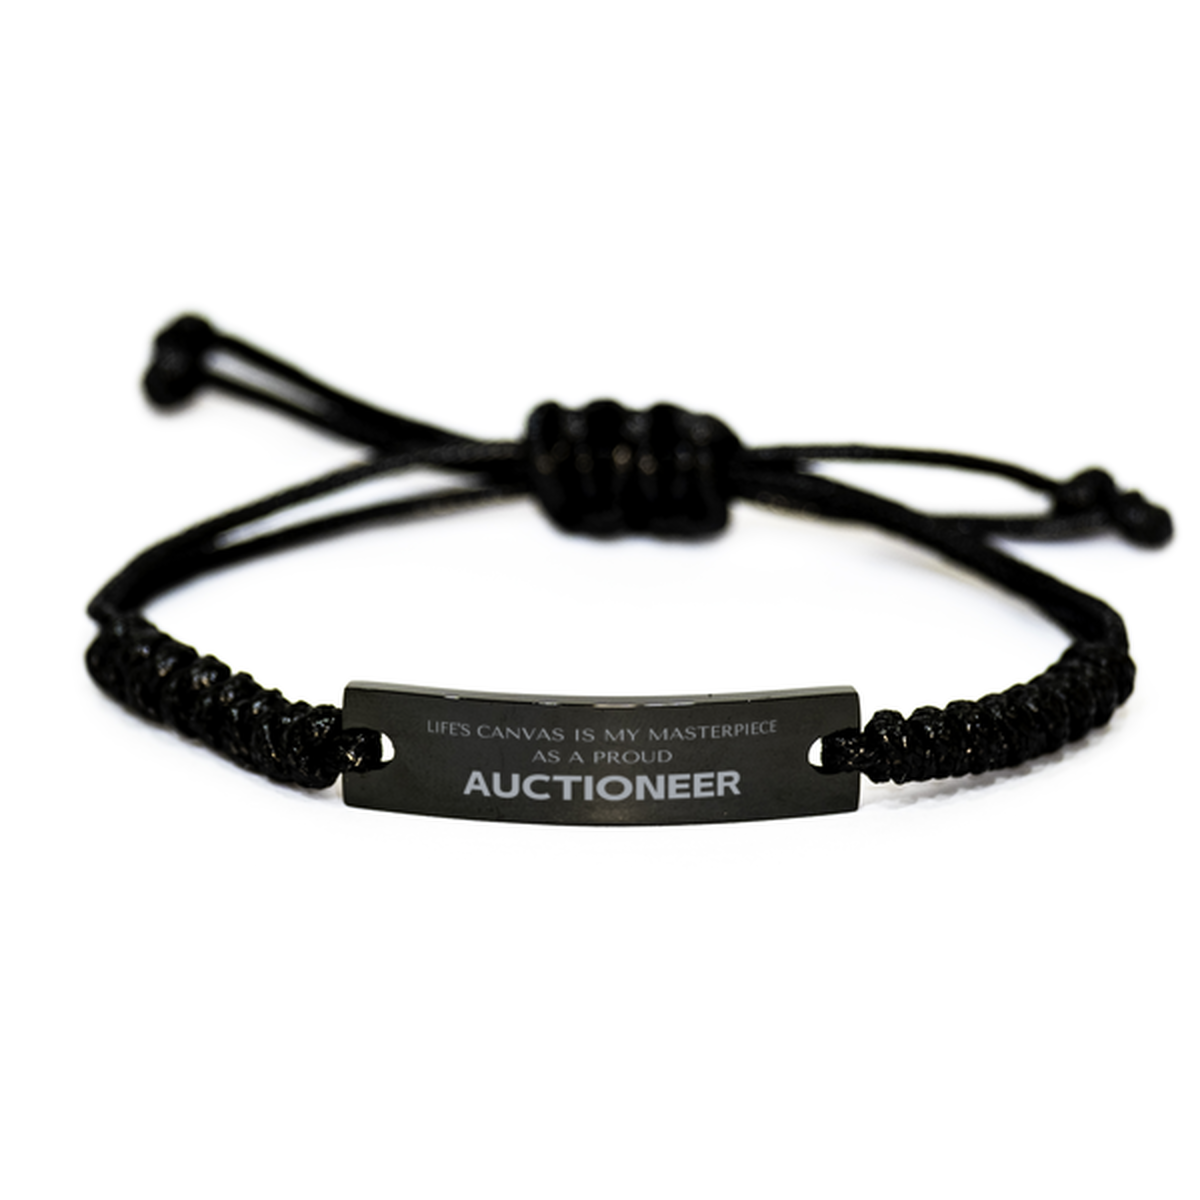 Proud Auctioneer Gifts, Life's canvas is my masterpiece, Epic Birthday Christmas Unique Black Rope Bracelet For Auctioneer, Coworkers, Men, Women, Friends